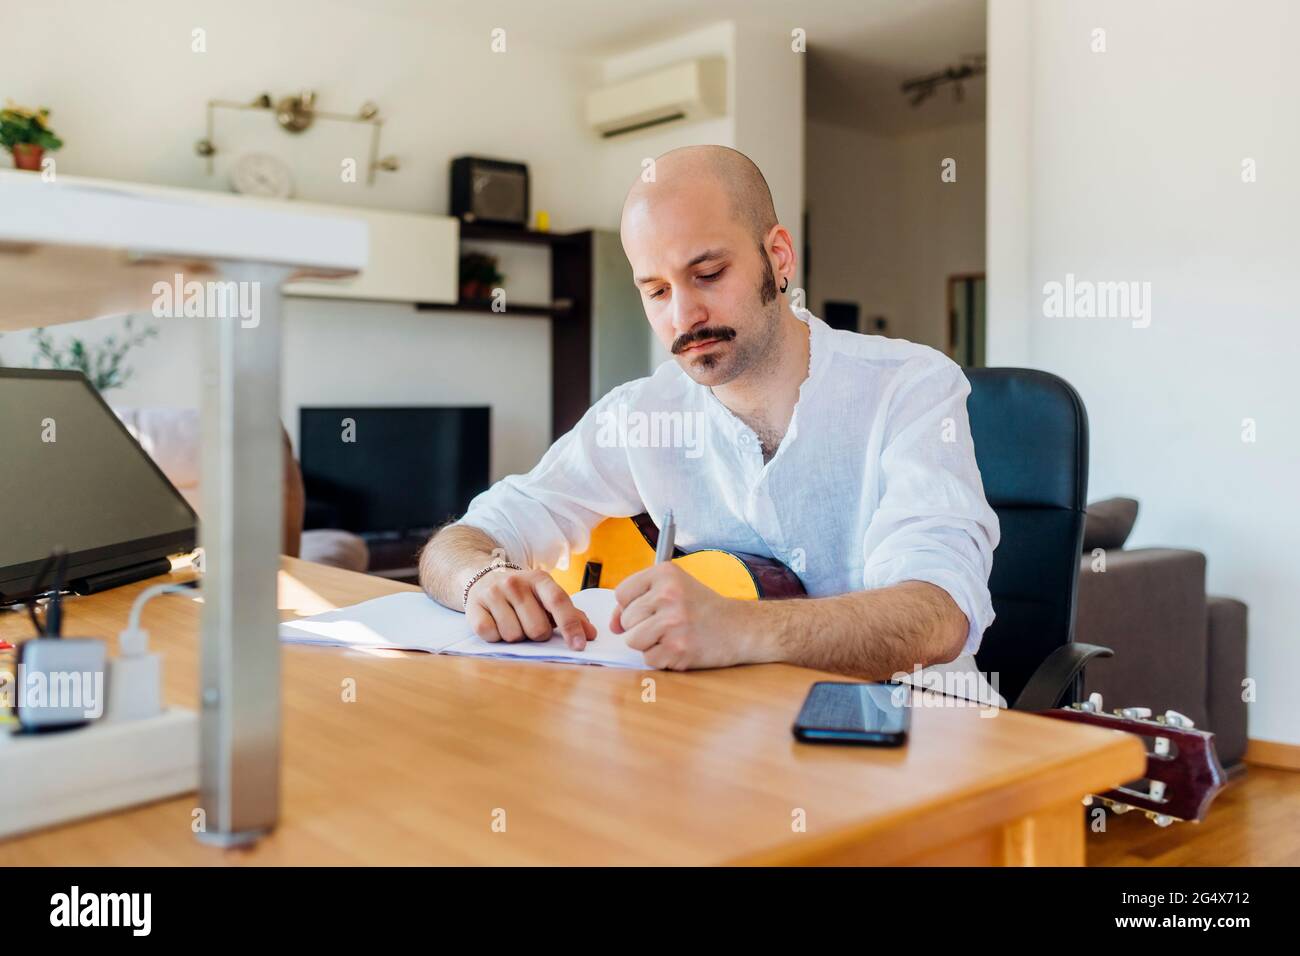 Male music composer with guitar writing musical notes at table in living room Stock Photo